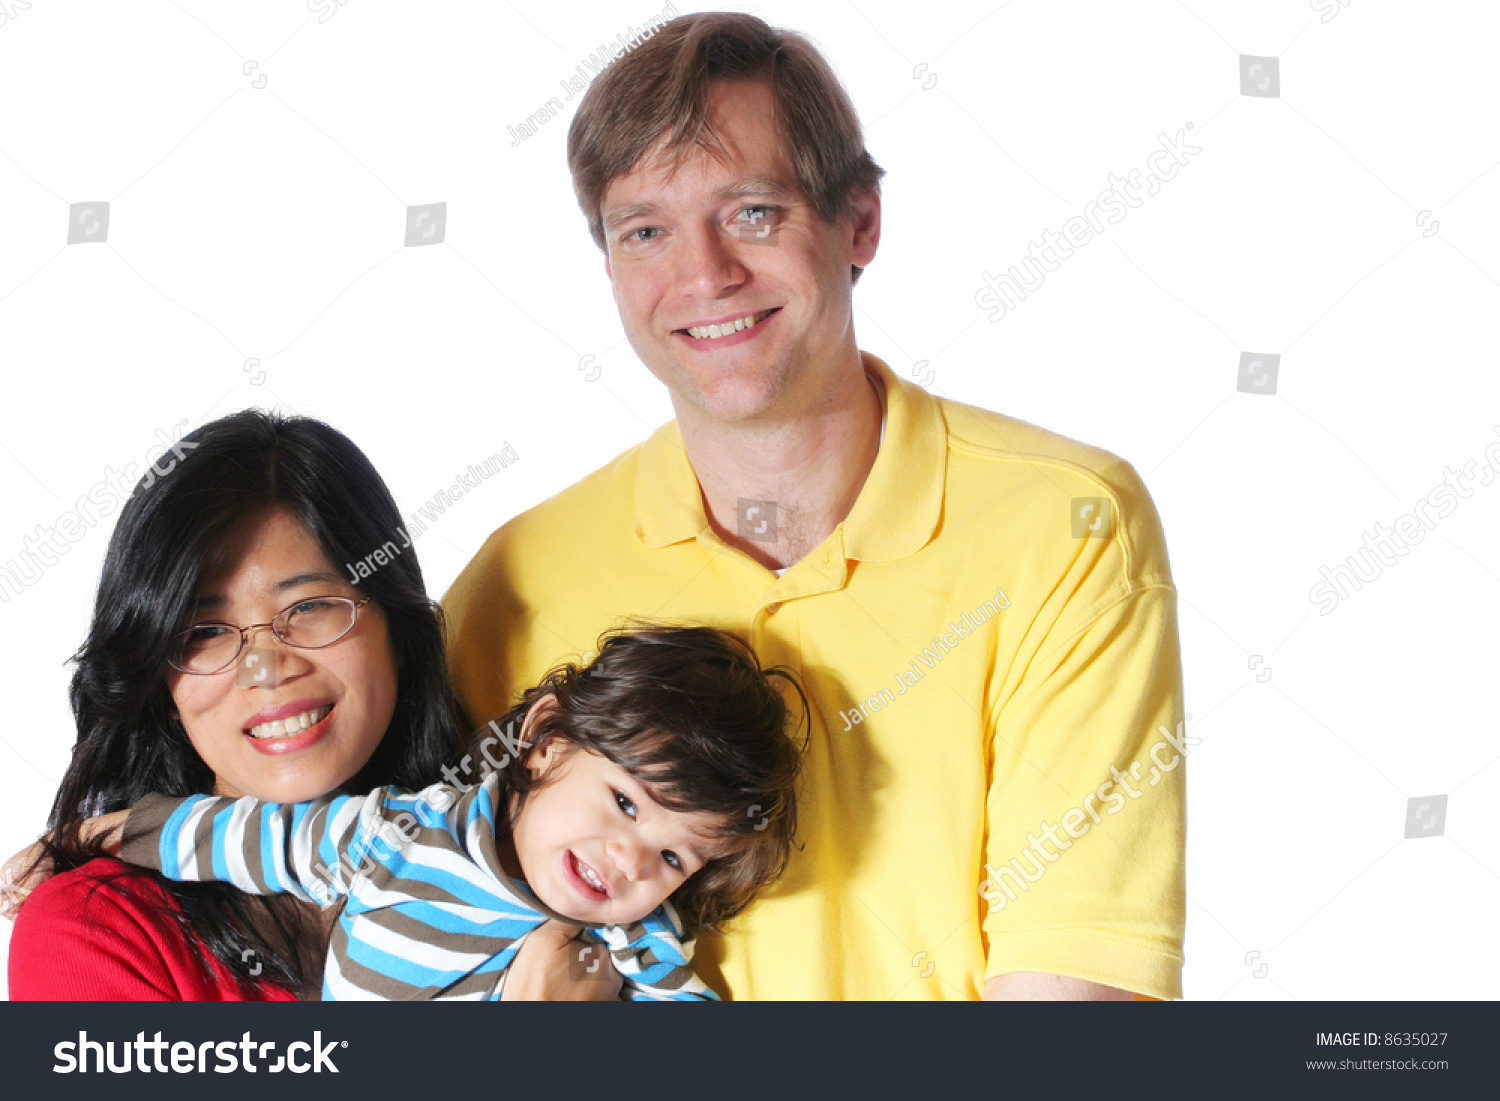 david edington recommends asian mother white father pic